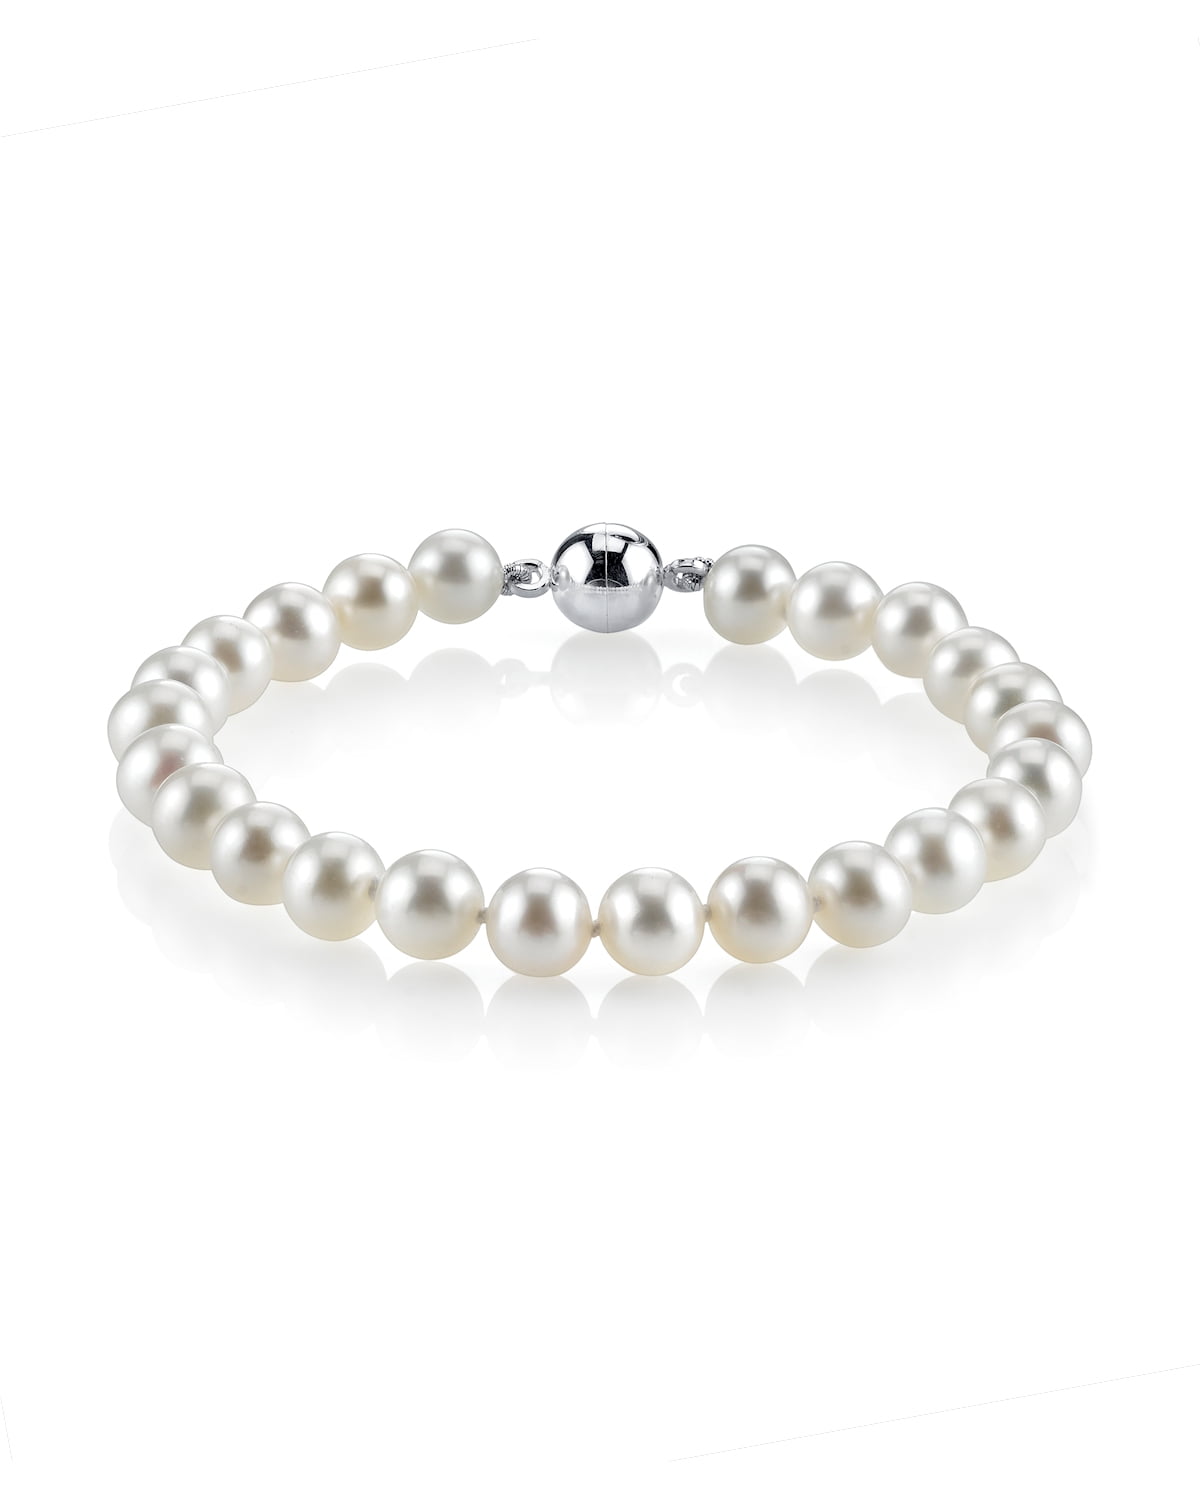 AAA Quality 8-9mm Round White Freshwater Cultured Pearl Bracelet